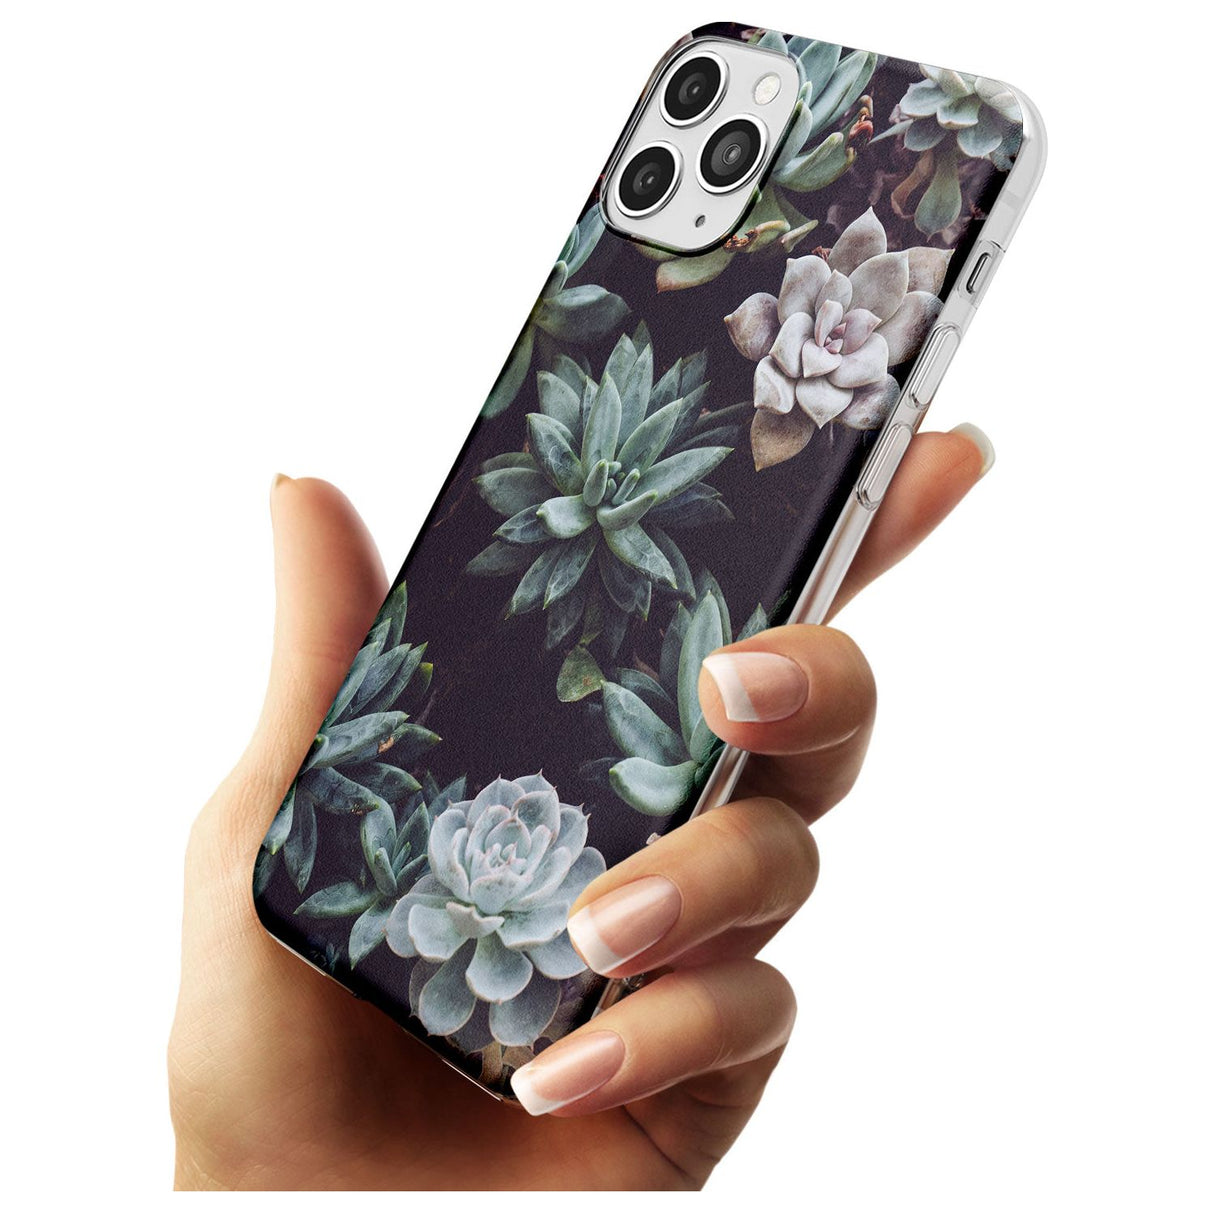 Mixed Succulents - Real Botanical Photographs Slim TPU Phone Case for iPhone 11 Pro Max